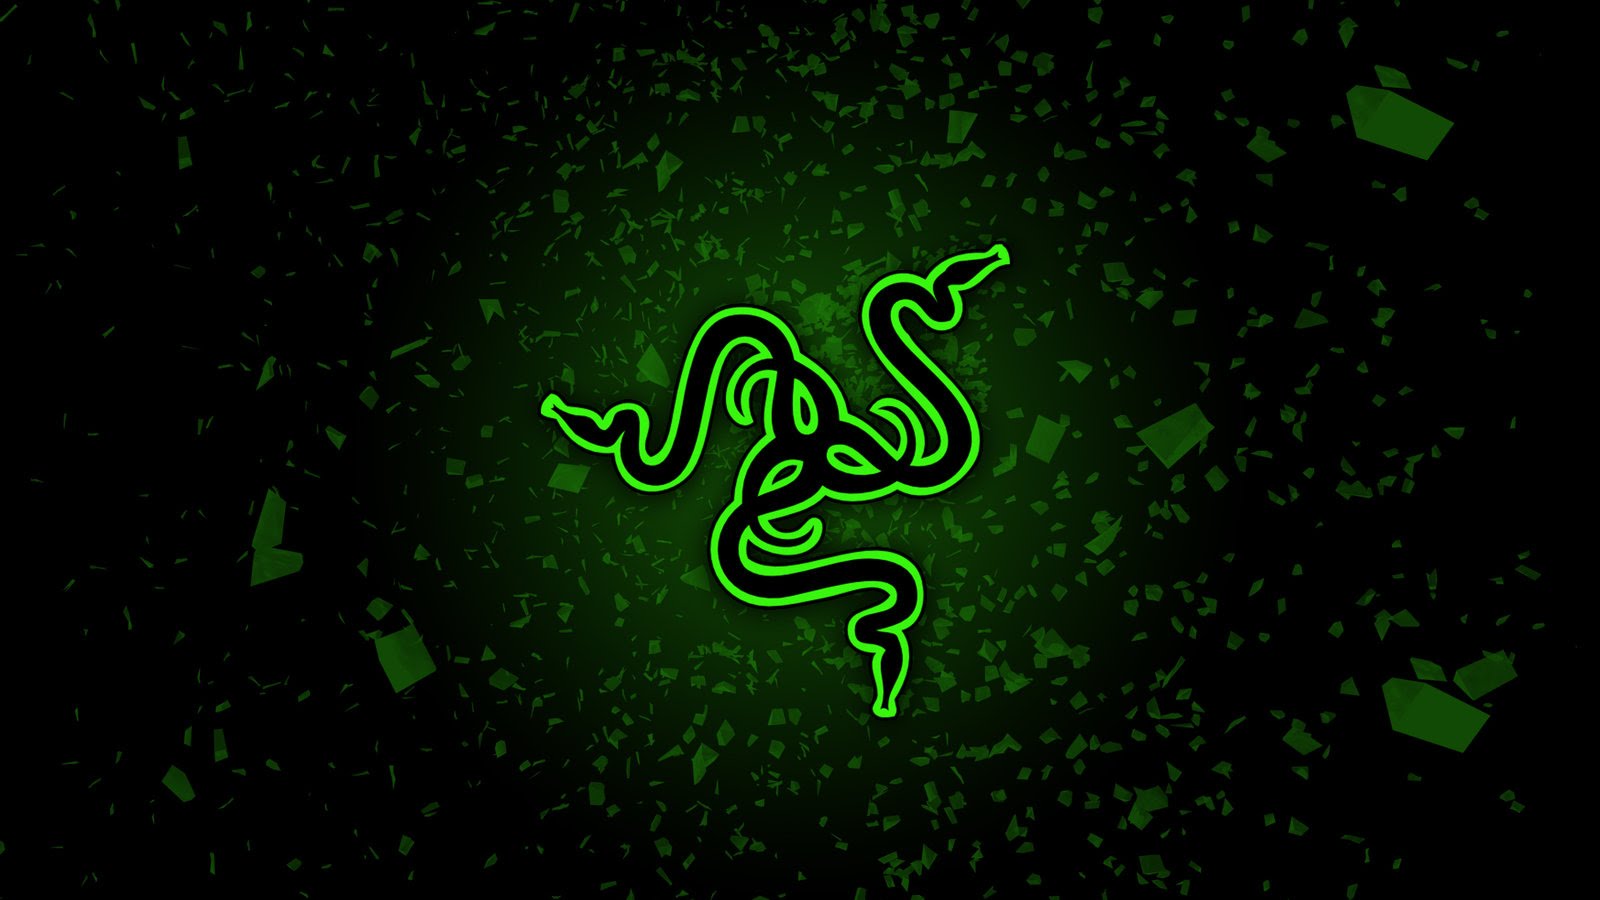 Razer To Commit US$50 Million To Help Business Partners